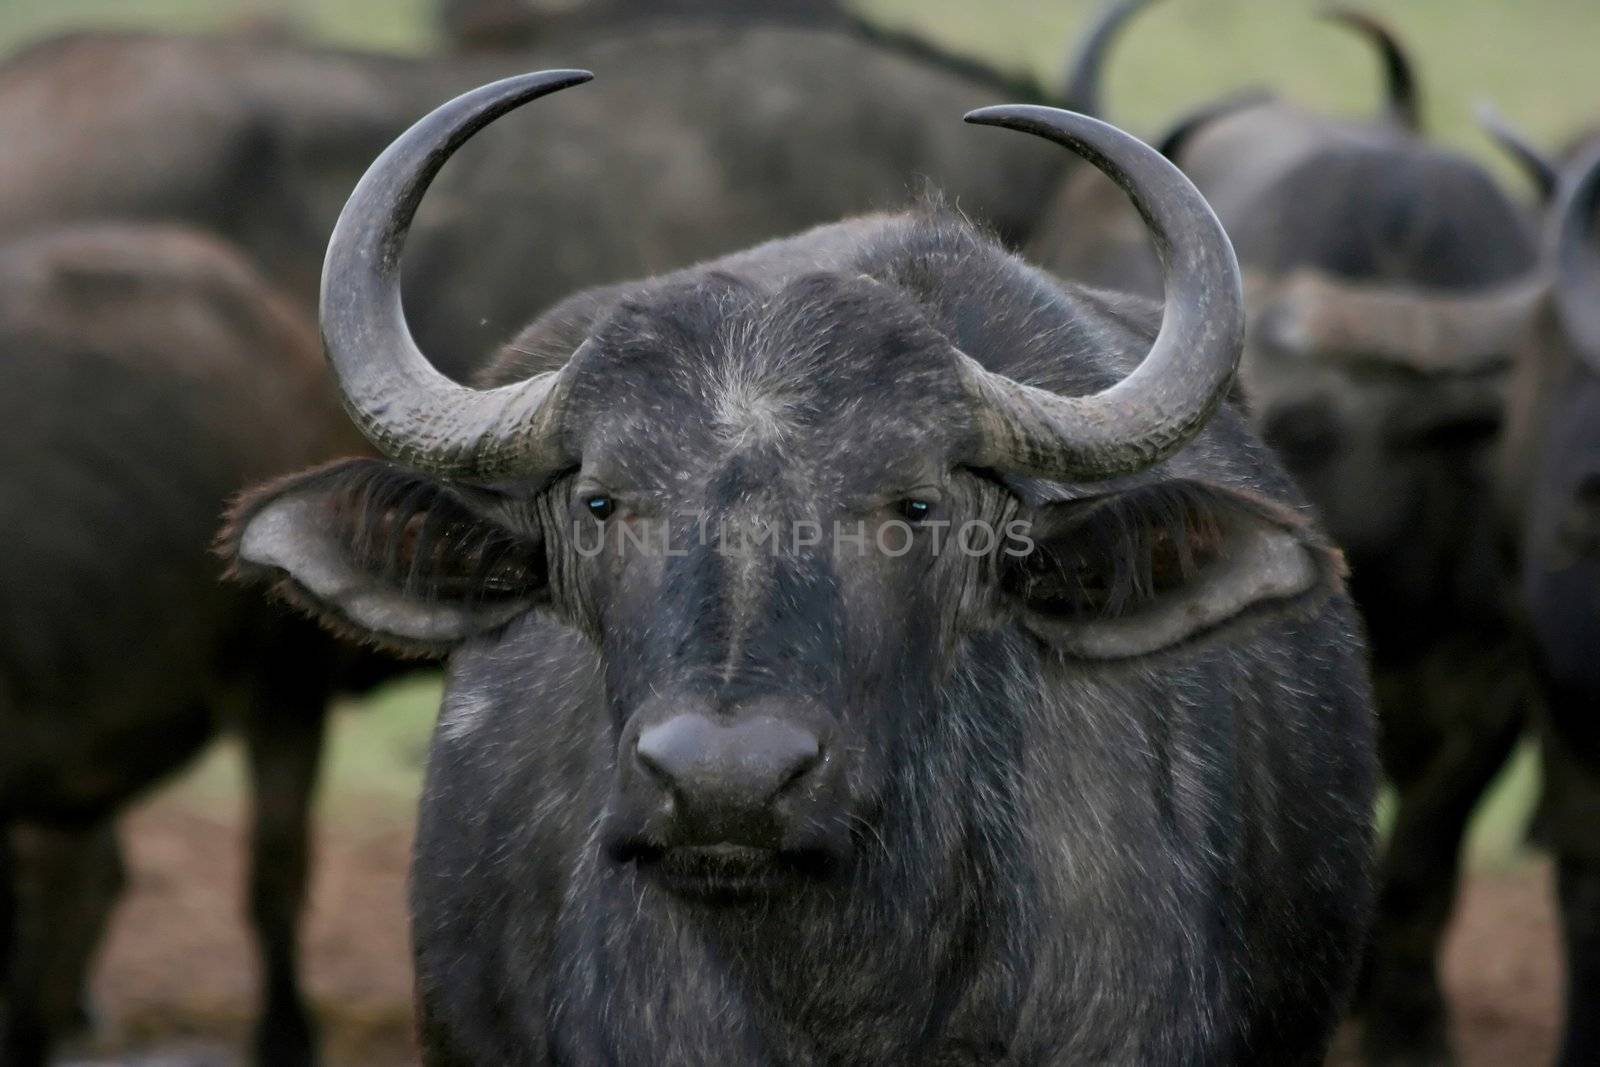 Old female buffalo with large curved horns